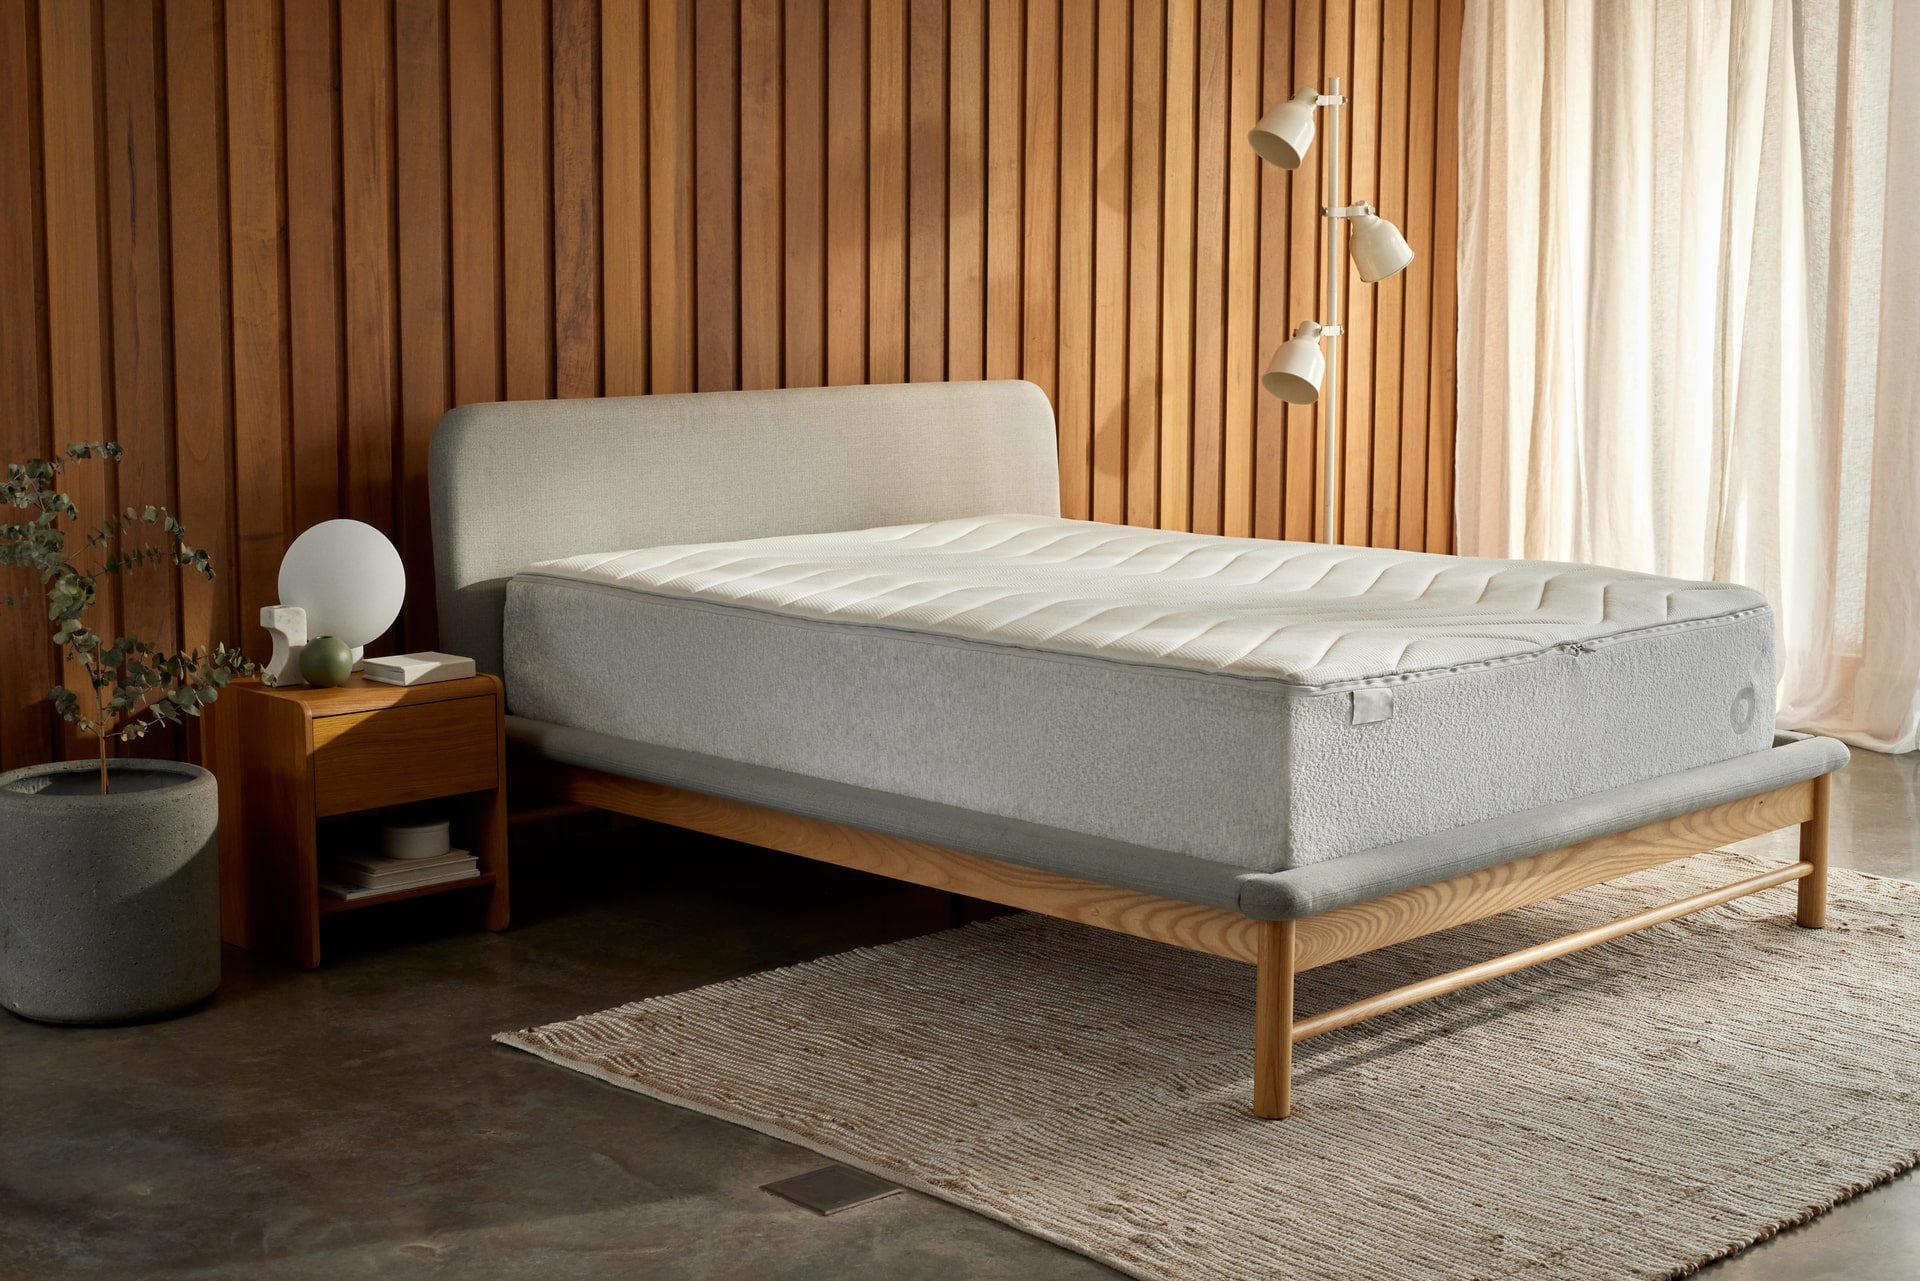 a Koala mattress on a Koala bed frame in a beautiful bedroom with a hard floor and panelled timber wall